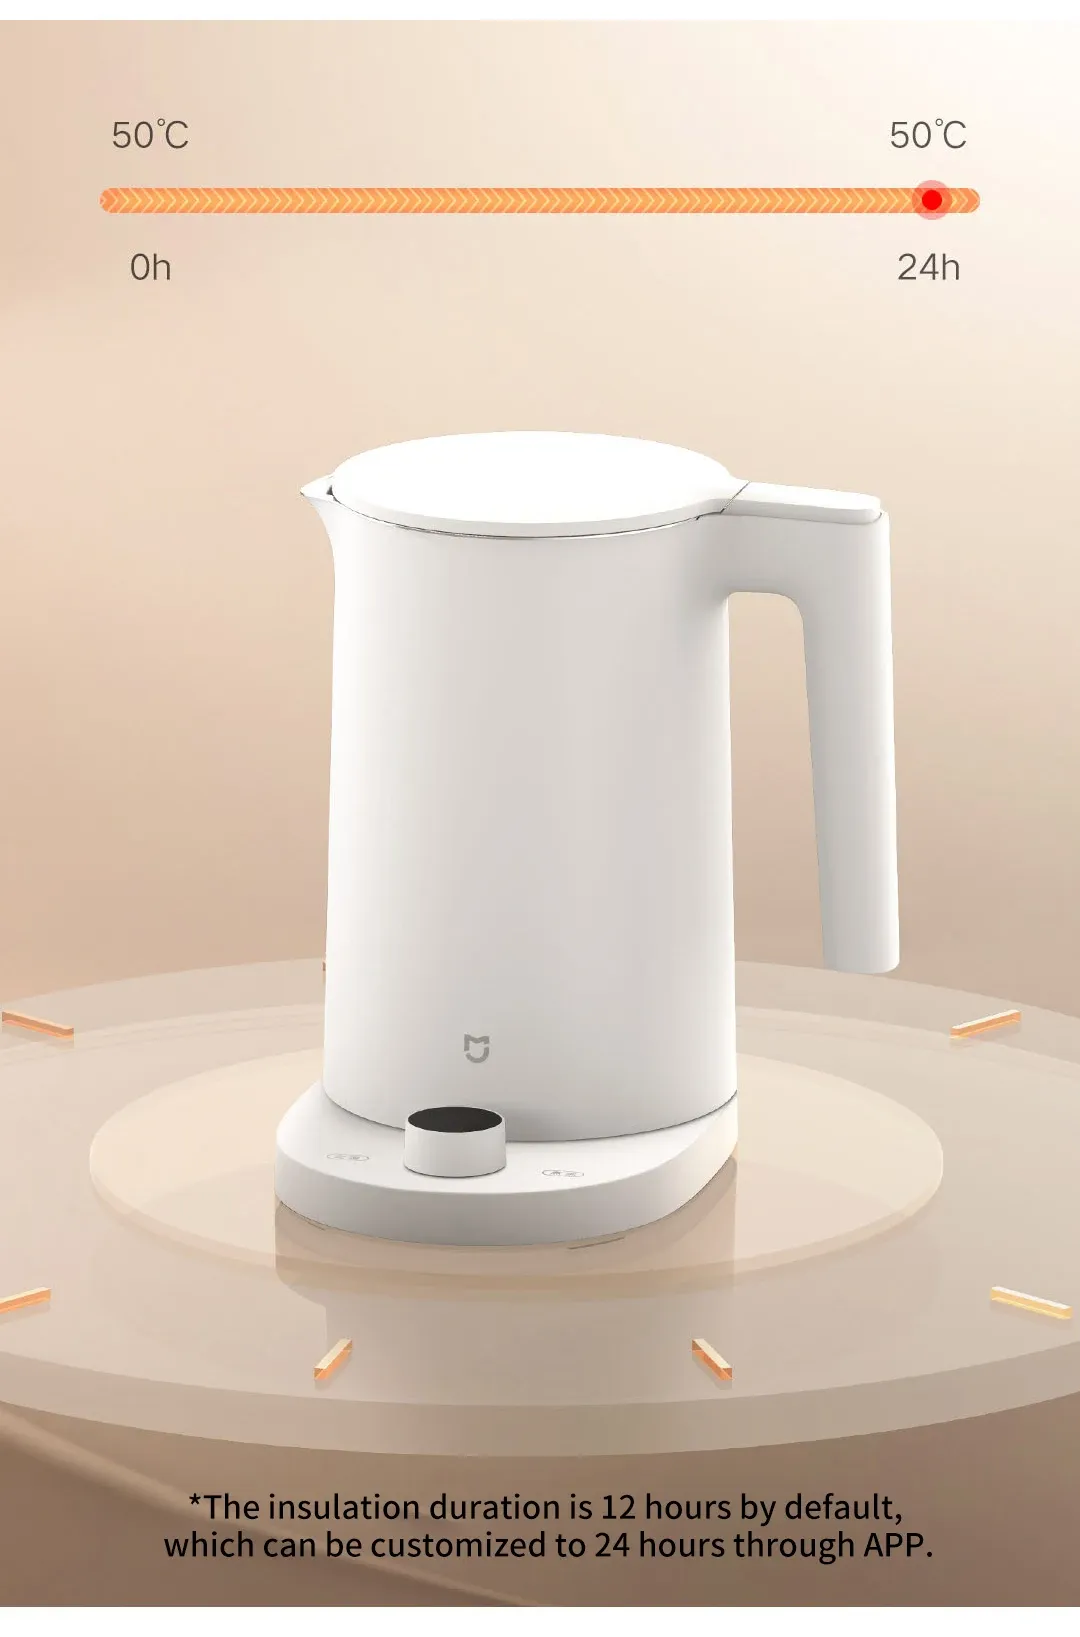 Xiaomi Mijia Thermostatic Electric Kettle 2 Pro 1.7L Stainless Steel App Control With Led Display